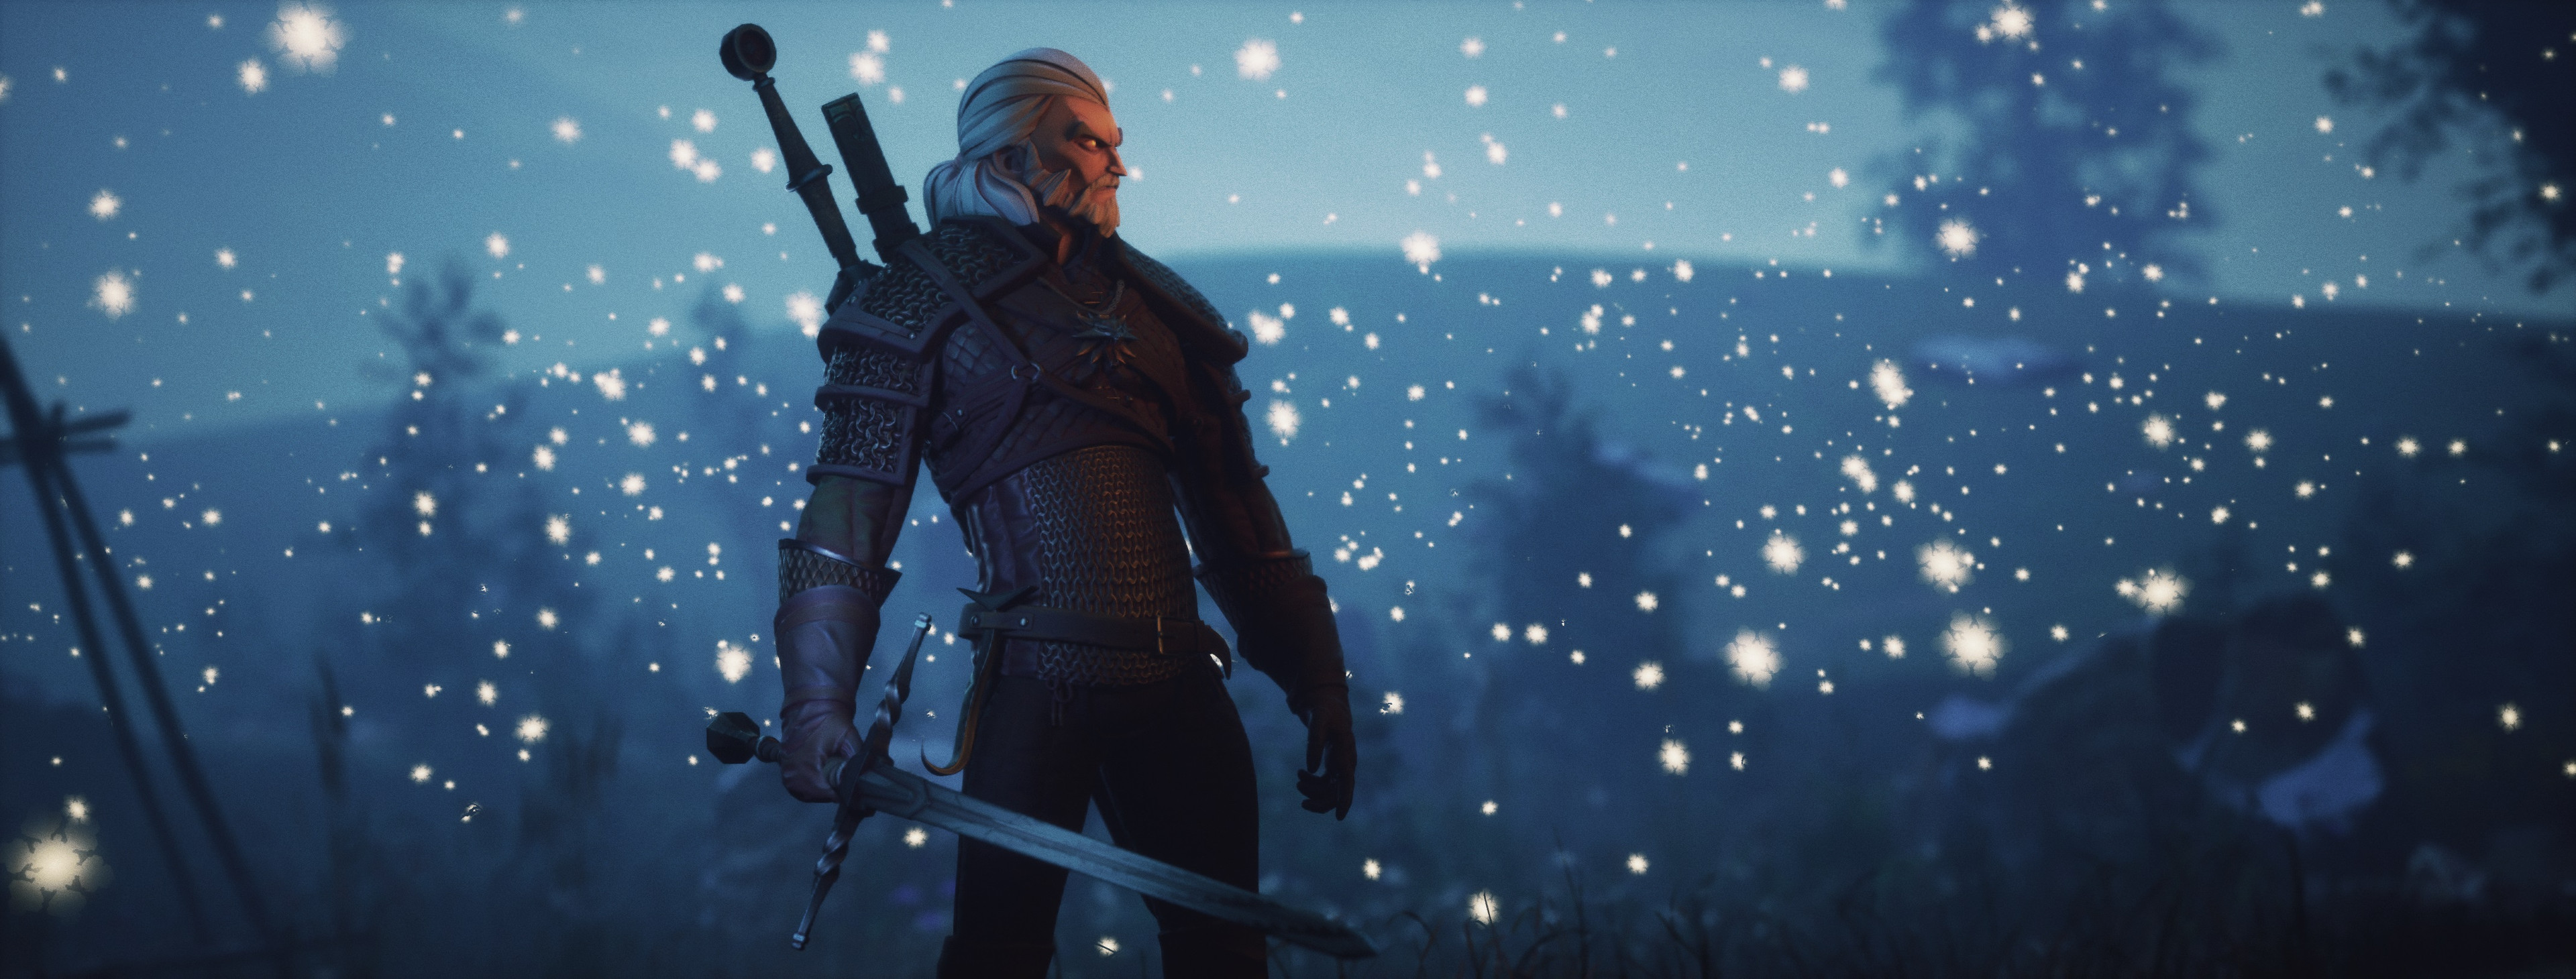 General 3840x1460 Michele Marchionni snow ultrawide snowflakes digital art The Witcher 3: Wild Hunt The Witcher fan art sword Geralt of Rivia CGI video game characters CD Projekt RED ArtStation